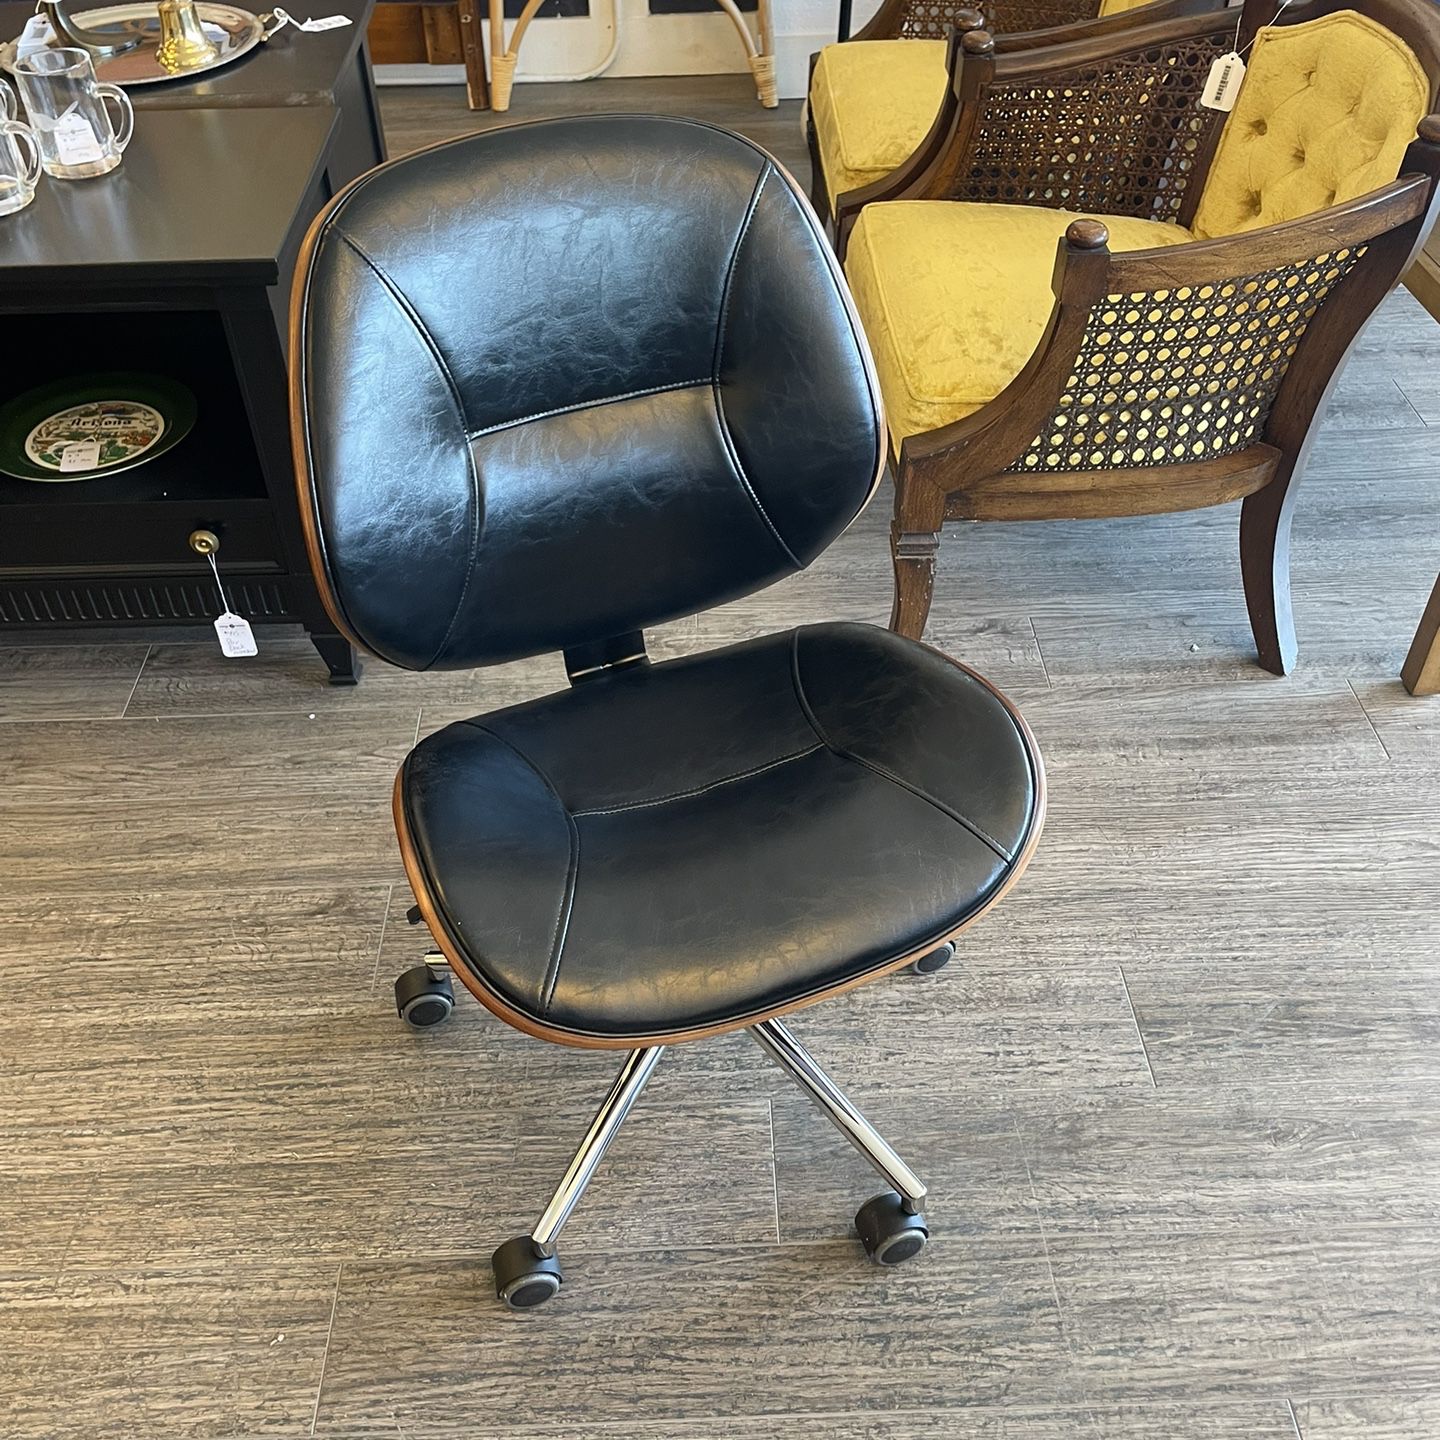 New! Desk Chairs Vegan Leather $225 Each